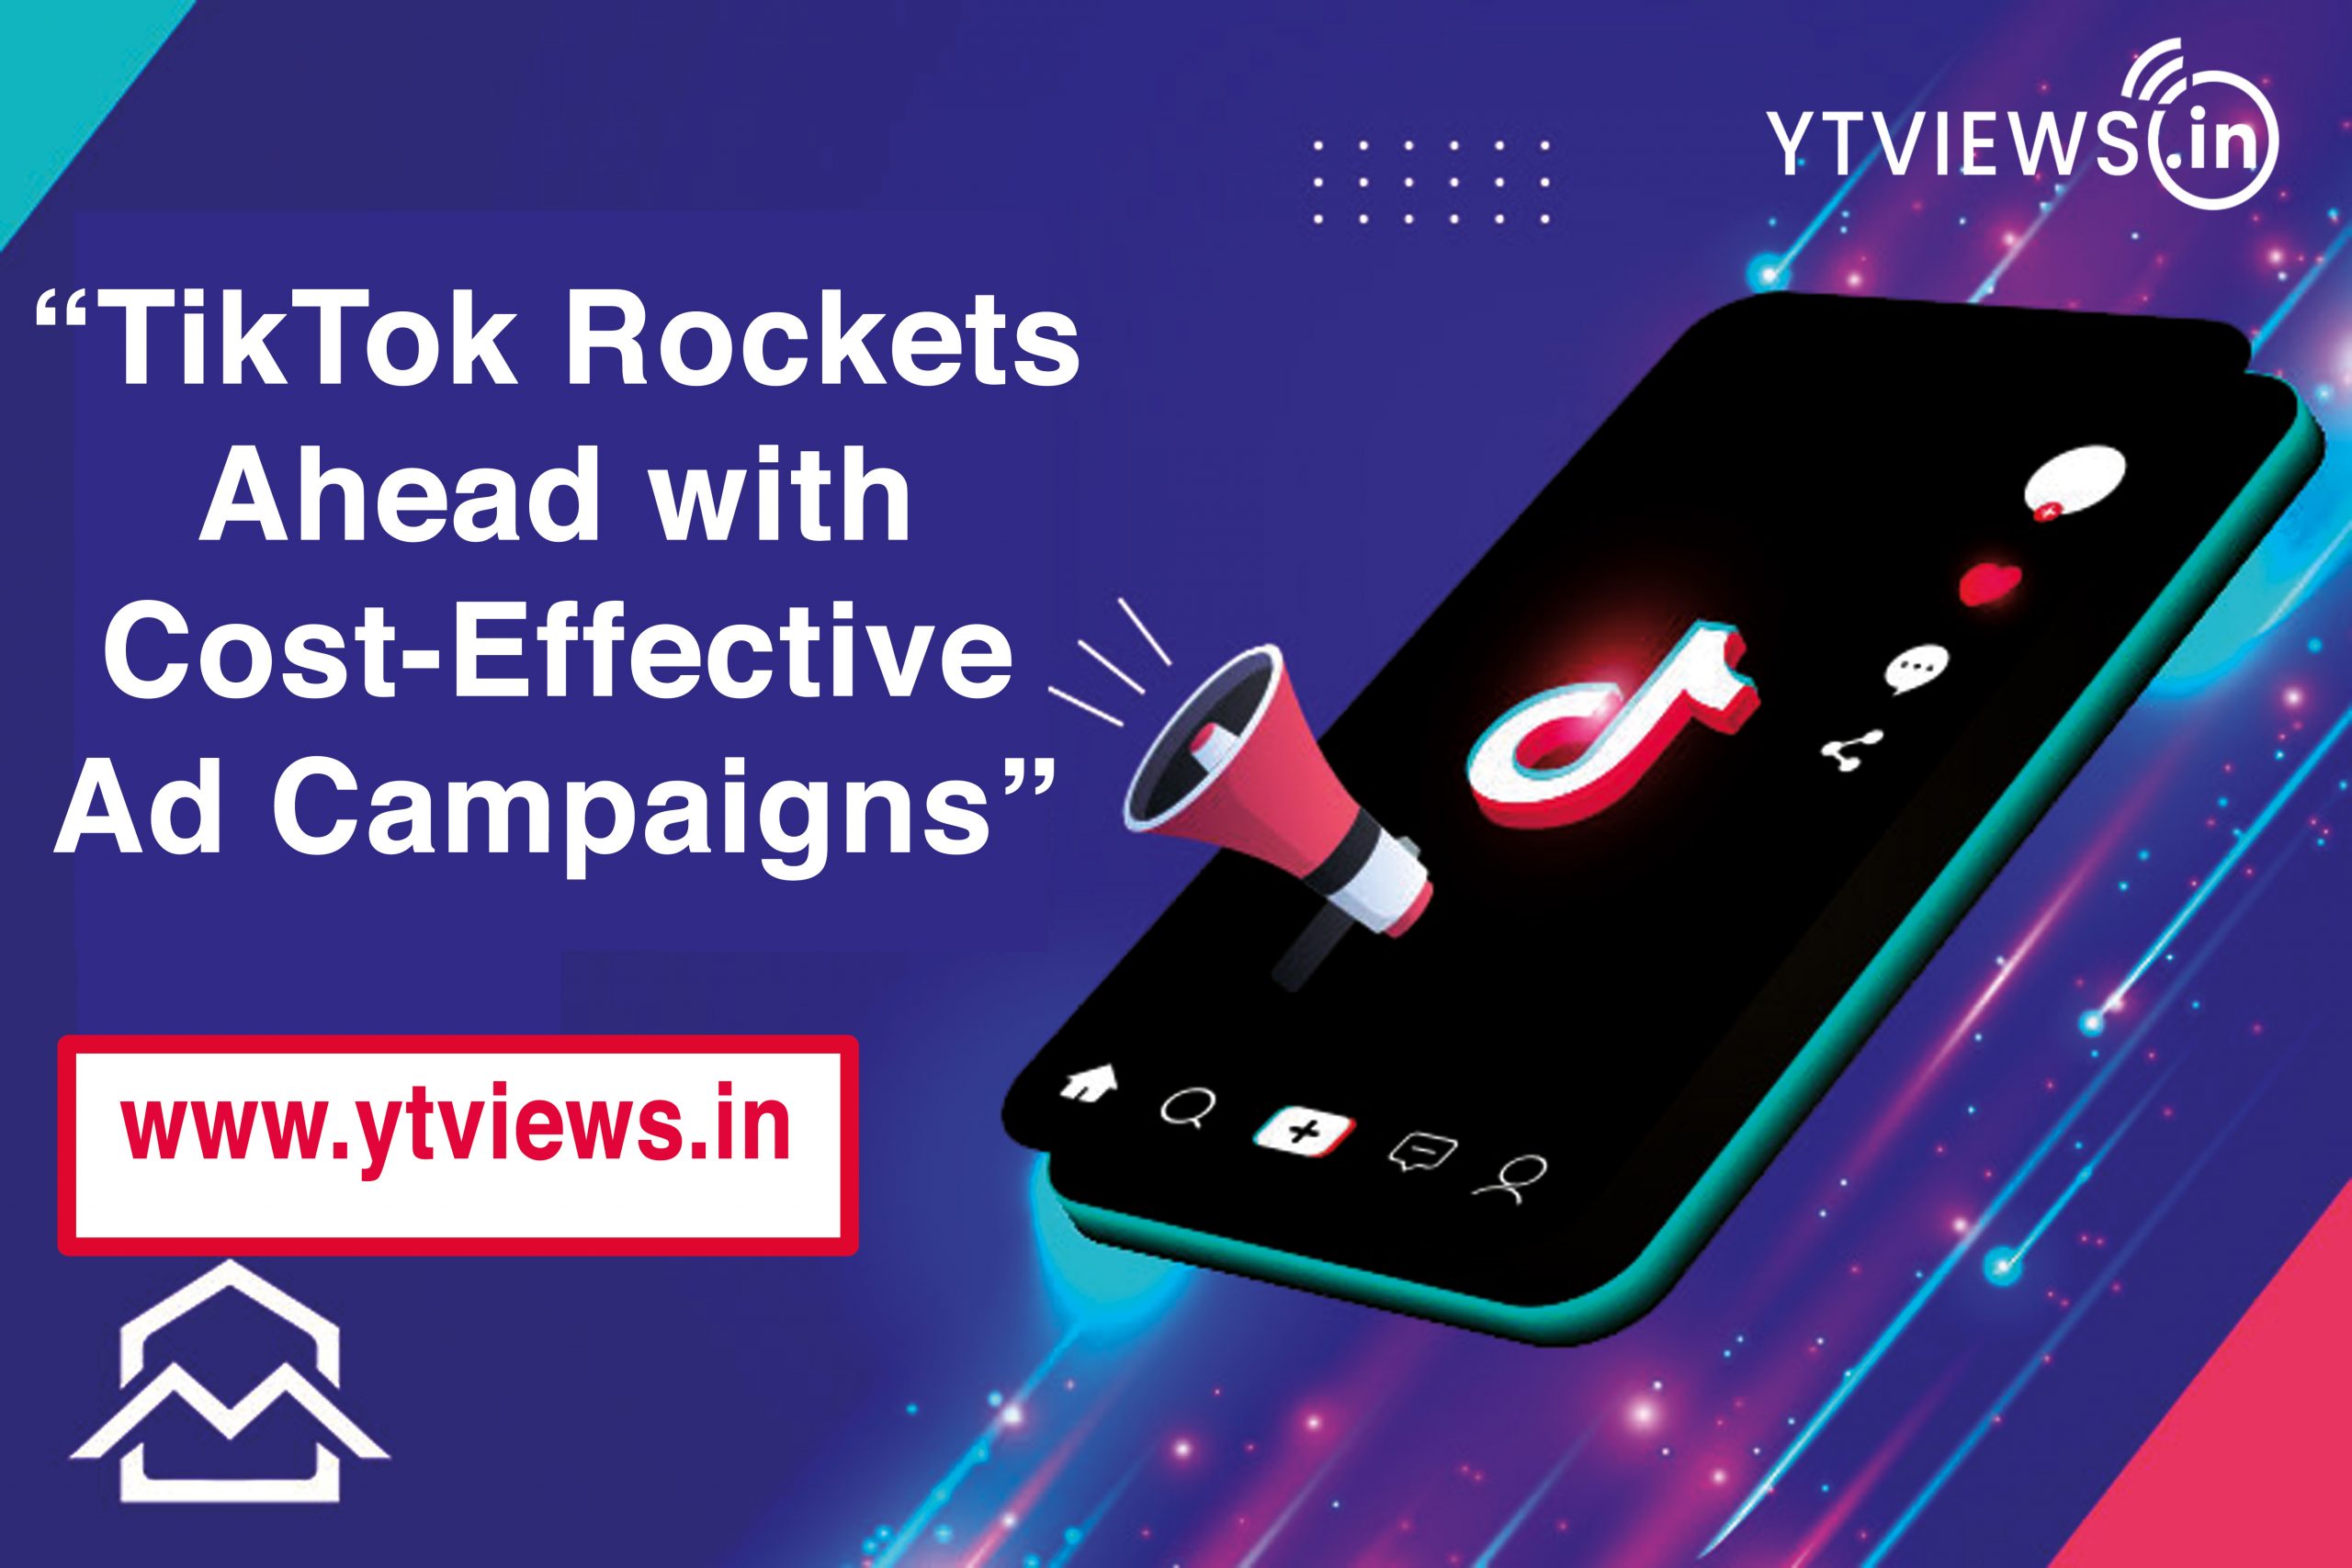 “TikTok Rockets Ahead with Cost-Effective Ad Campaigns”